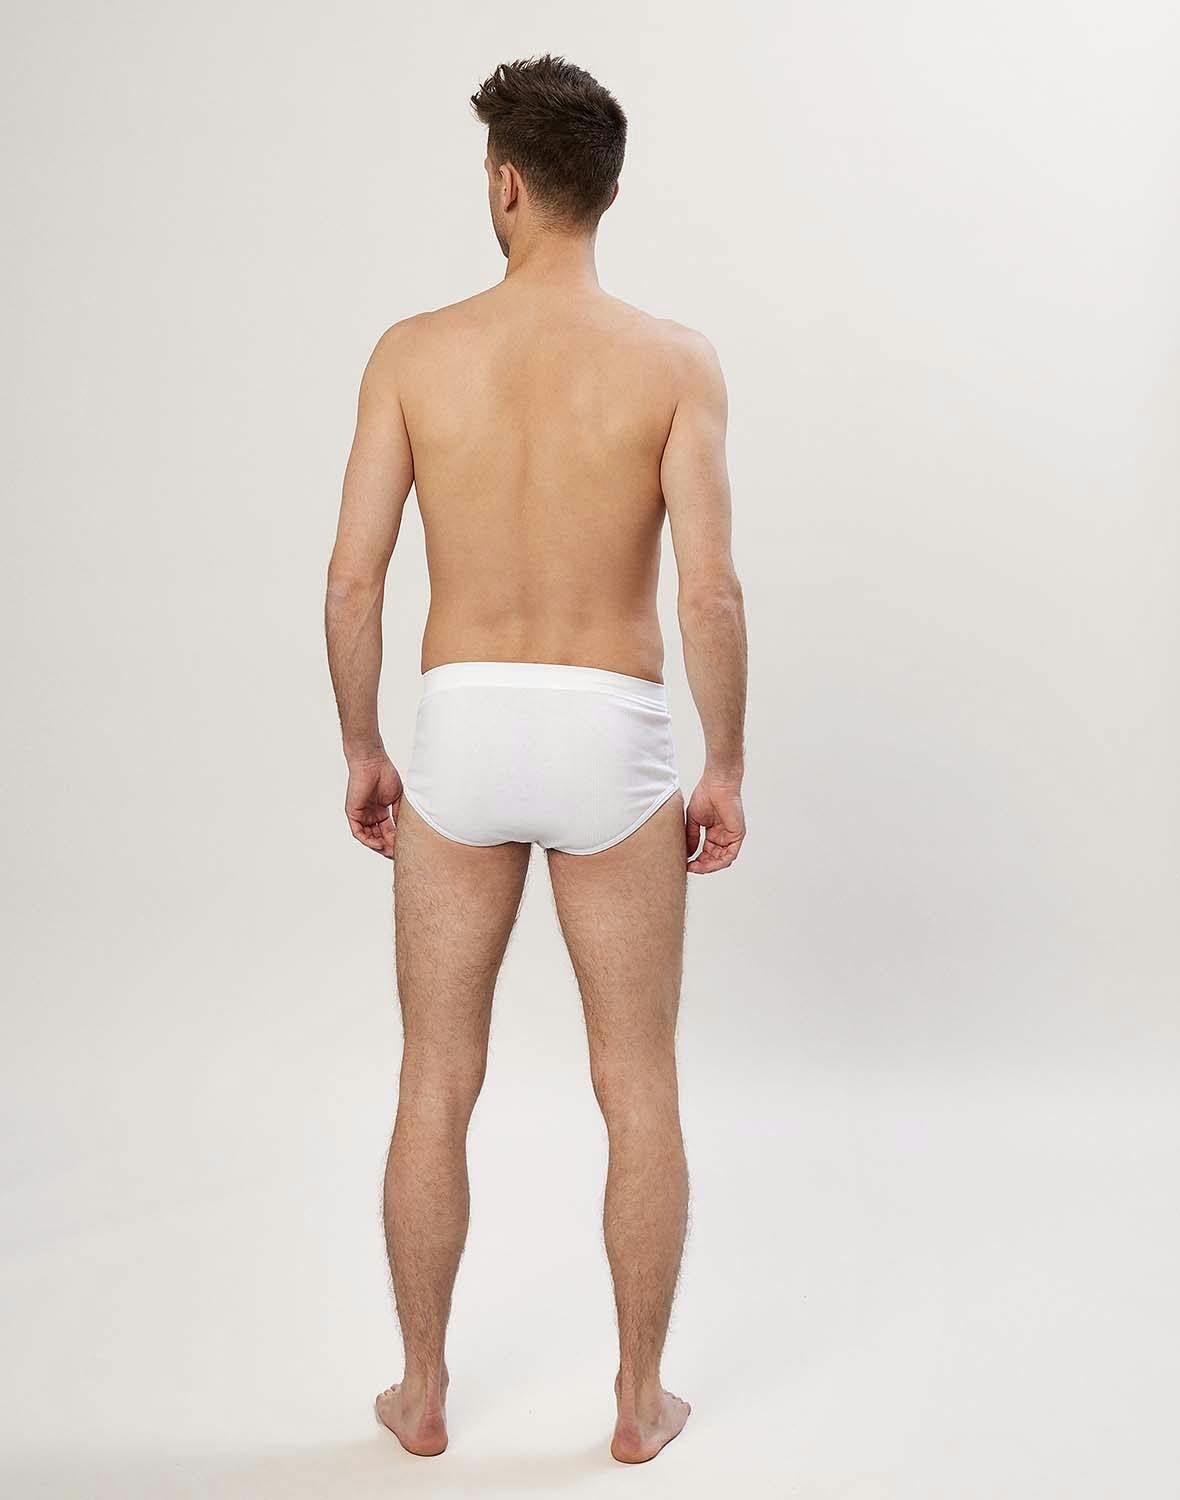 Men's classic cotton briefs with fly